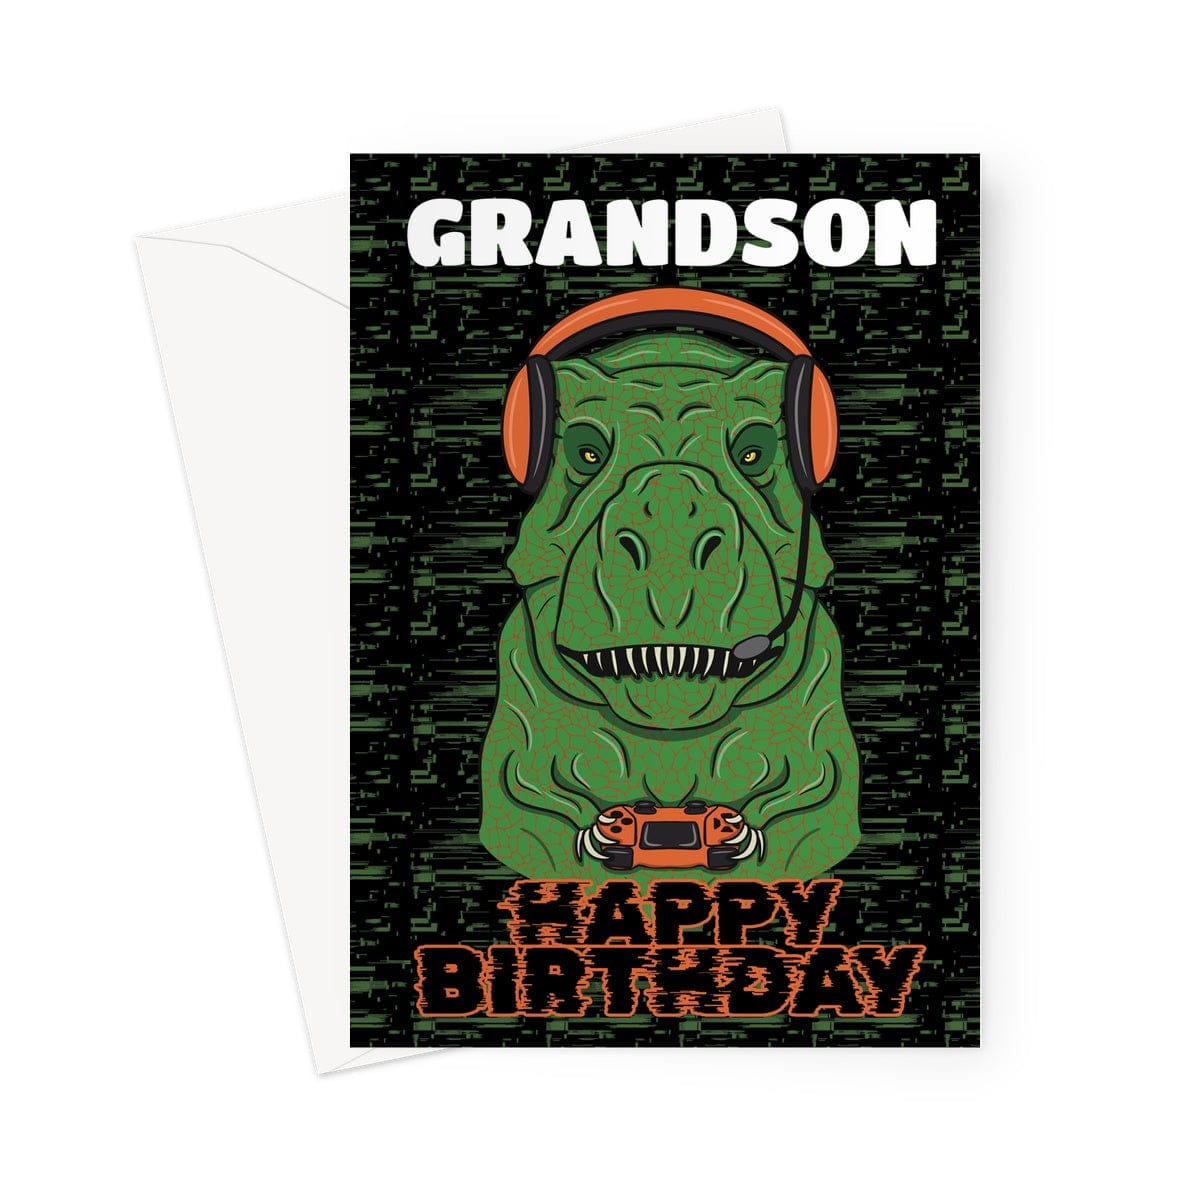 Birthday card for a video gamer who loves Dinosaurs.